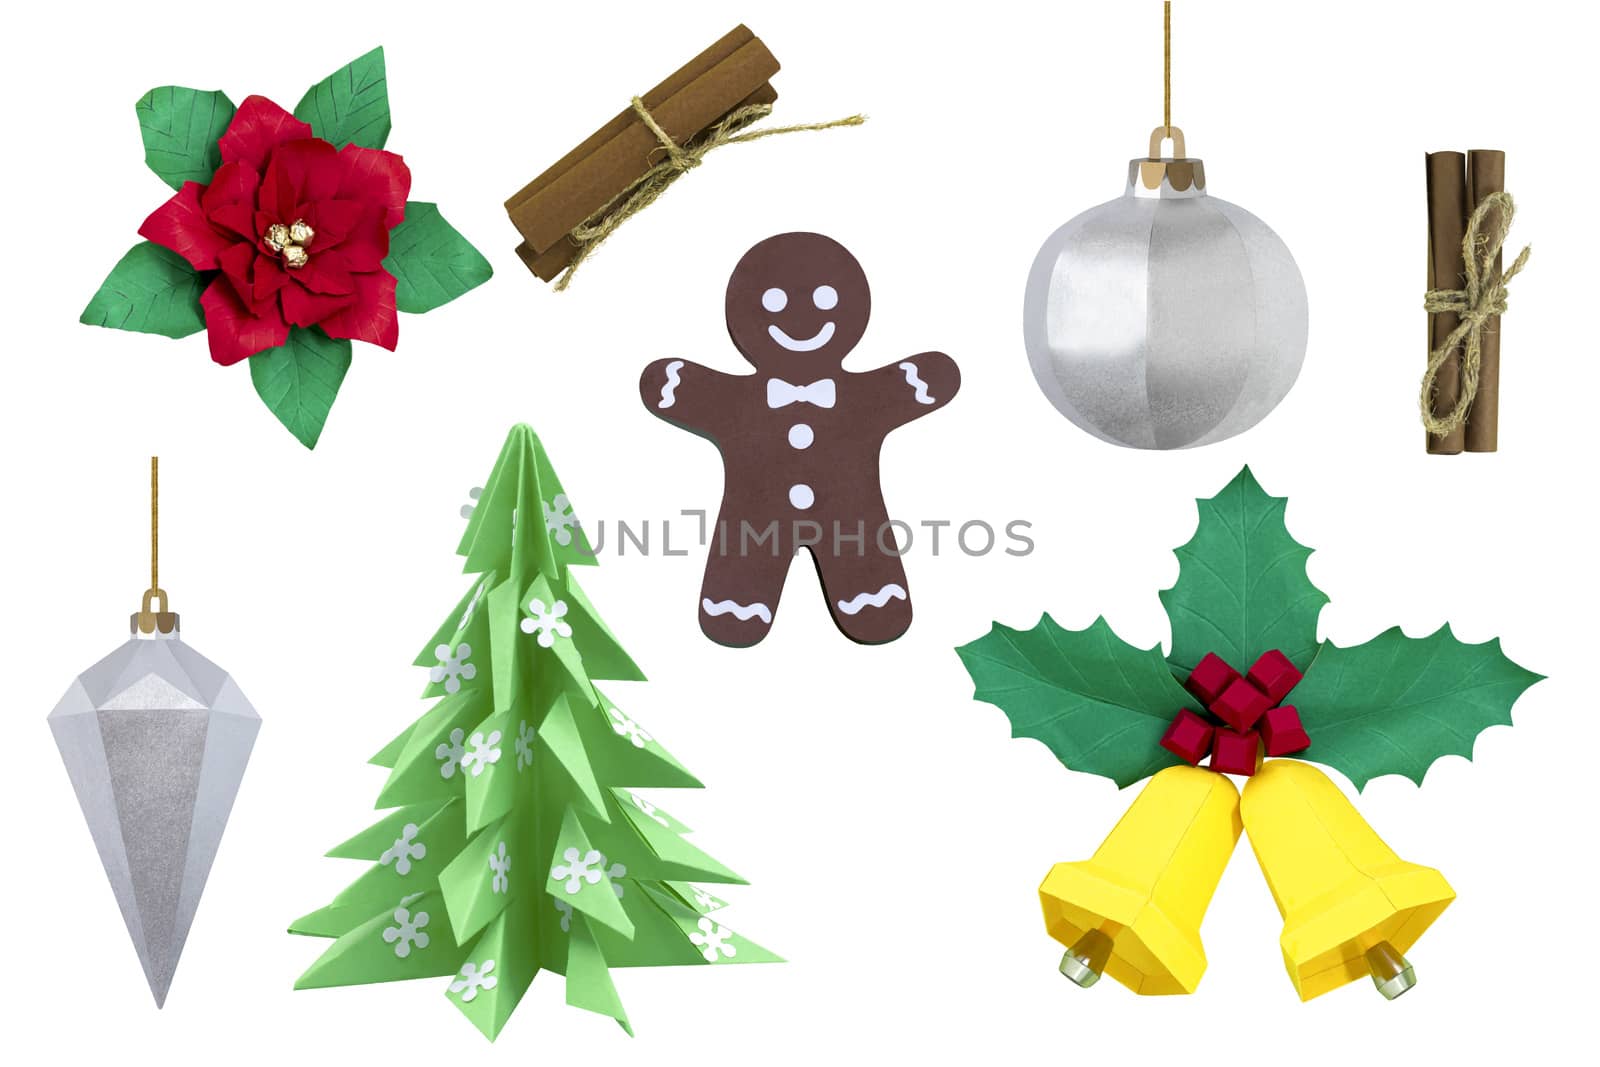 Set of paper Christmas and New Year decor isolated on white background. Paper art and craft. Handmade real paper objects. Paper Christmas tree, toys, poinsettia, bells, gingerbread man, cinnamon